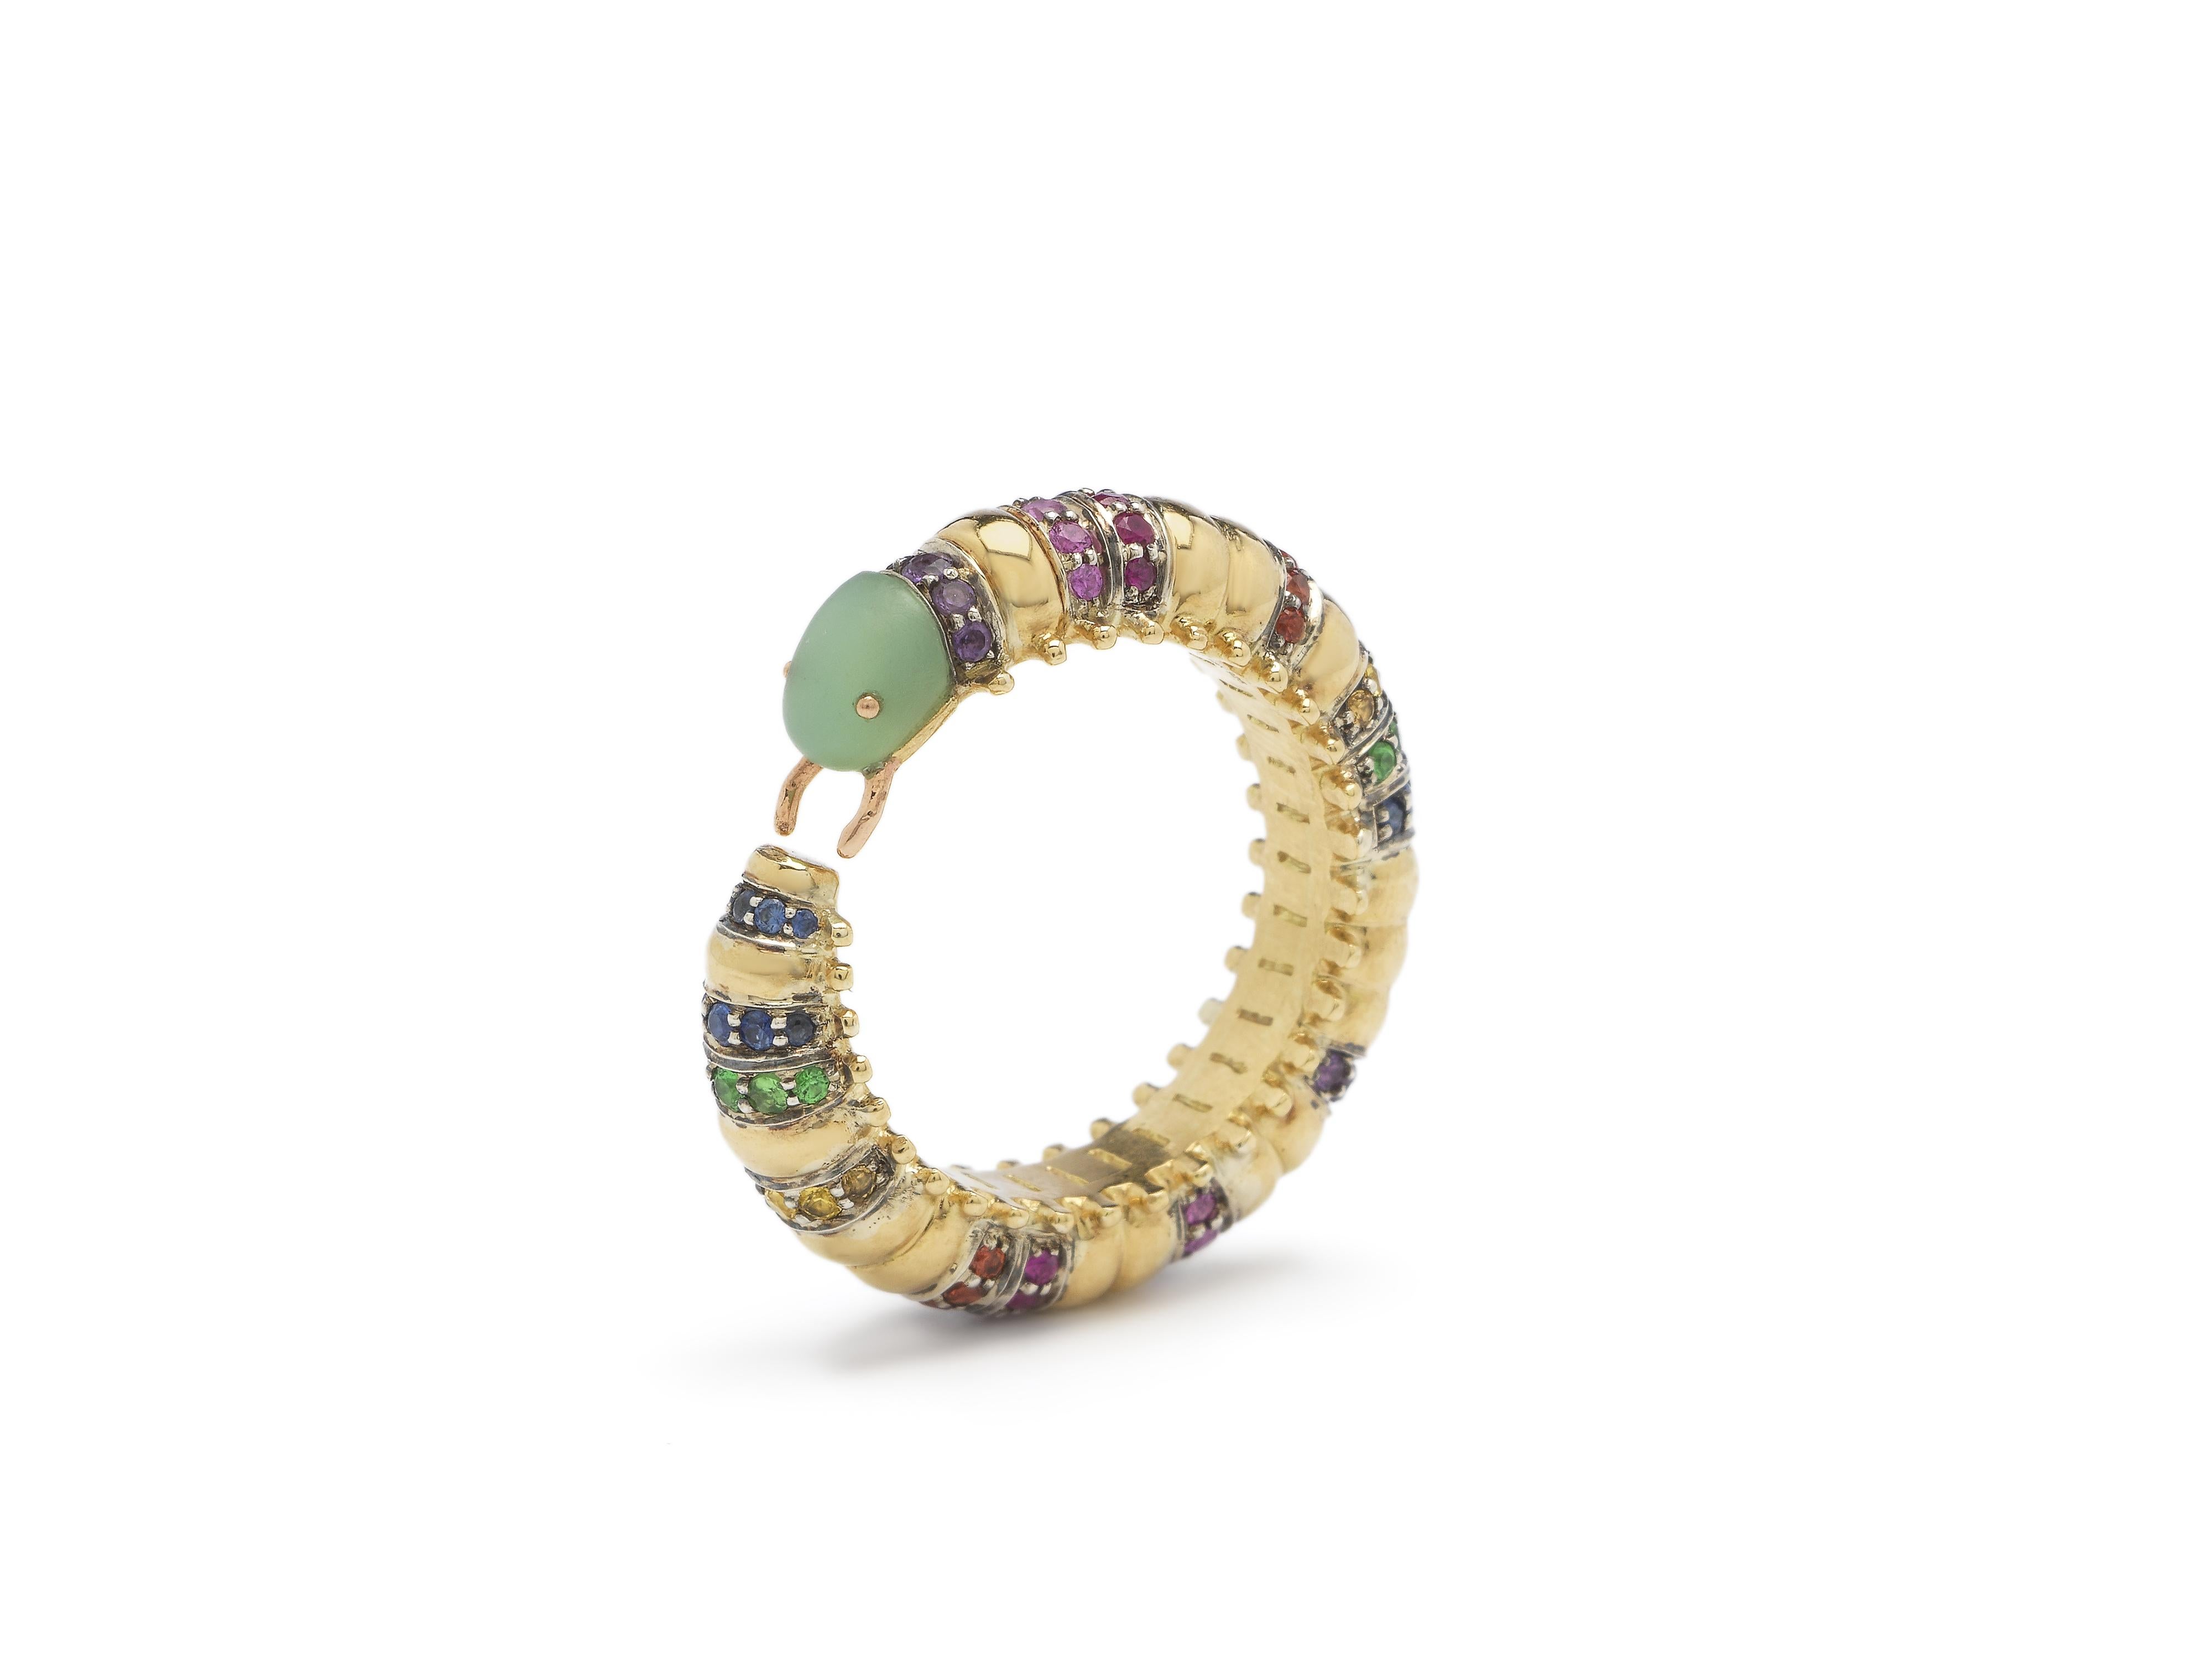 A millipede curves around the finger to form this unique, head-turning eternity ring. The ring is fashioned in 18k yellow gold and sterling silver, with the insect boasting rainbow tones of sapphires that embellish its body, with its head carved in